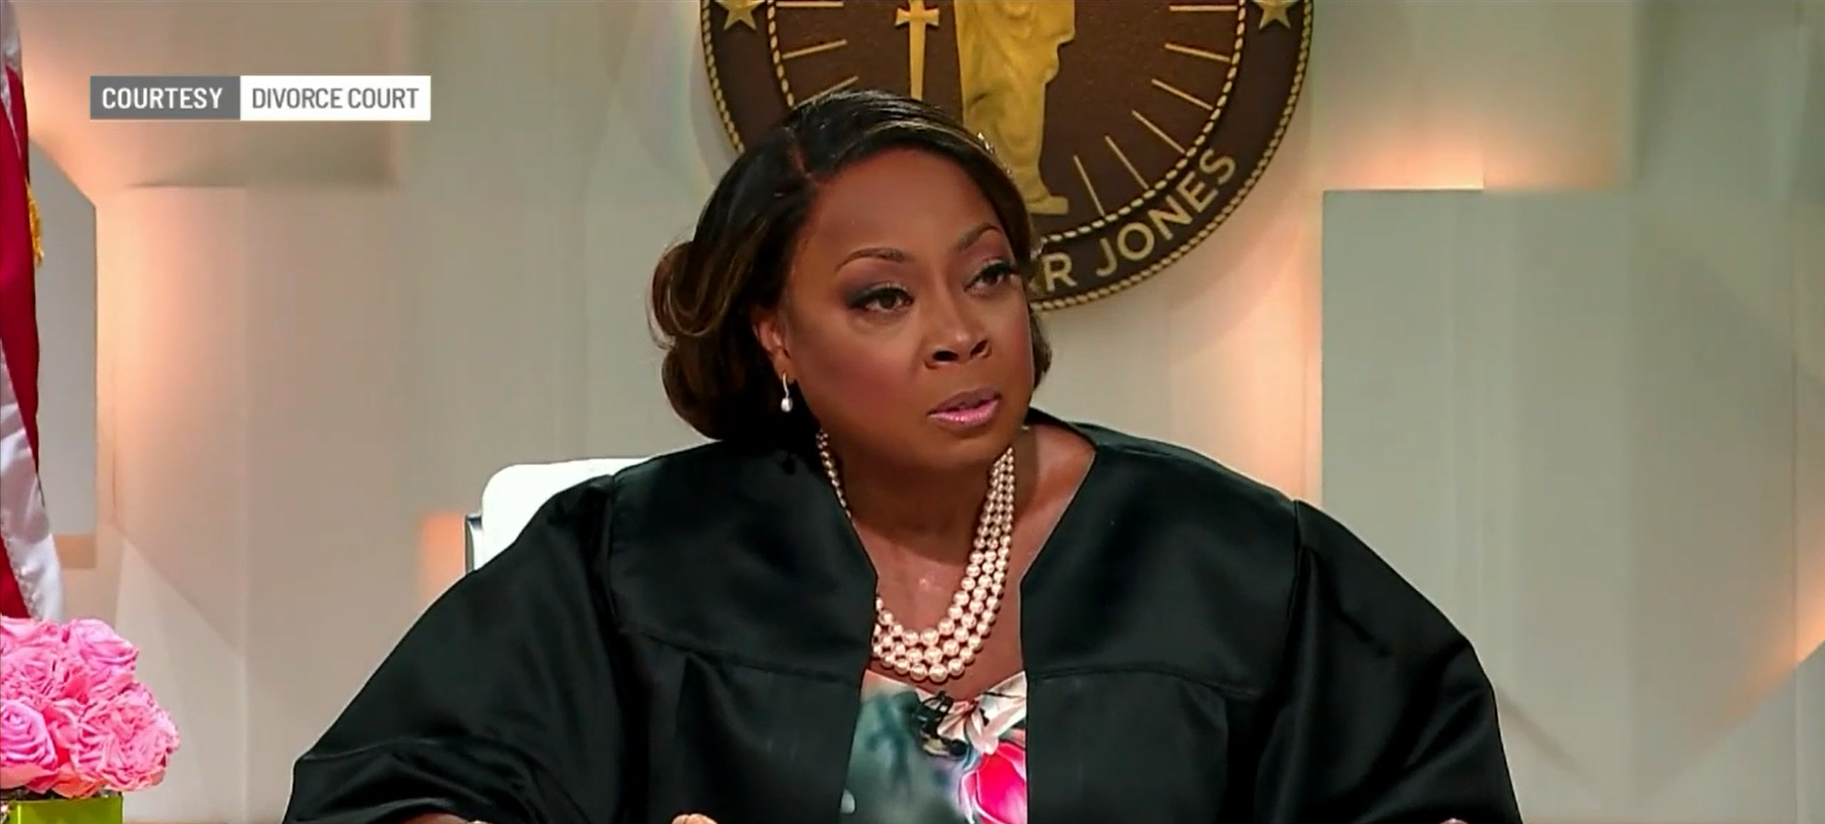 Star Jones takes over as Divorce Court judge Indianapolis News